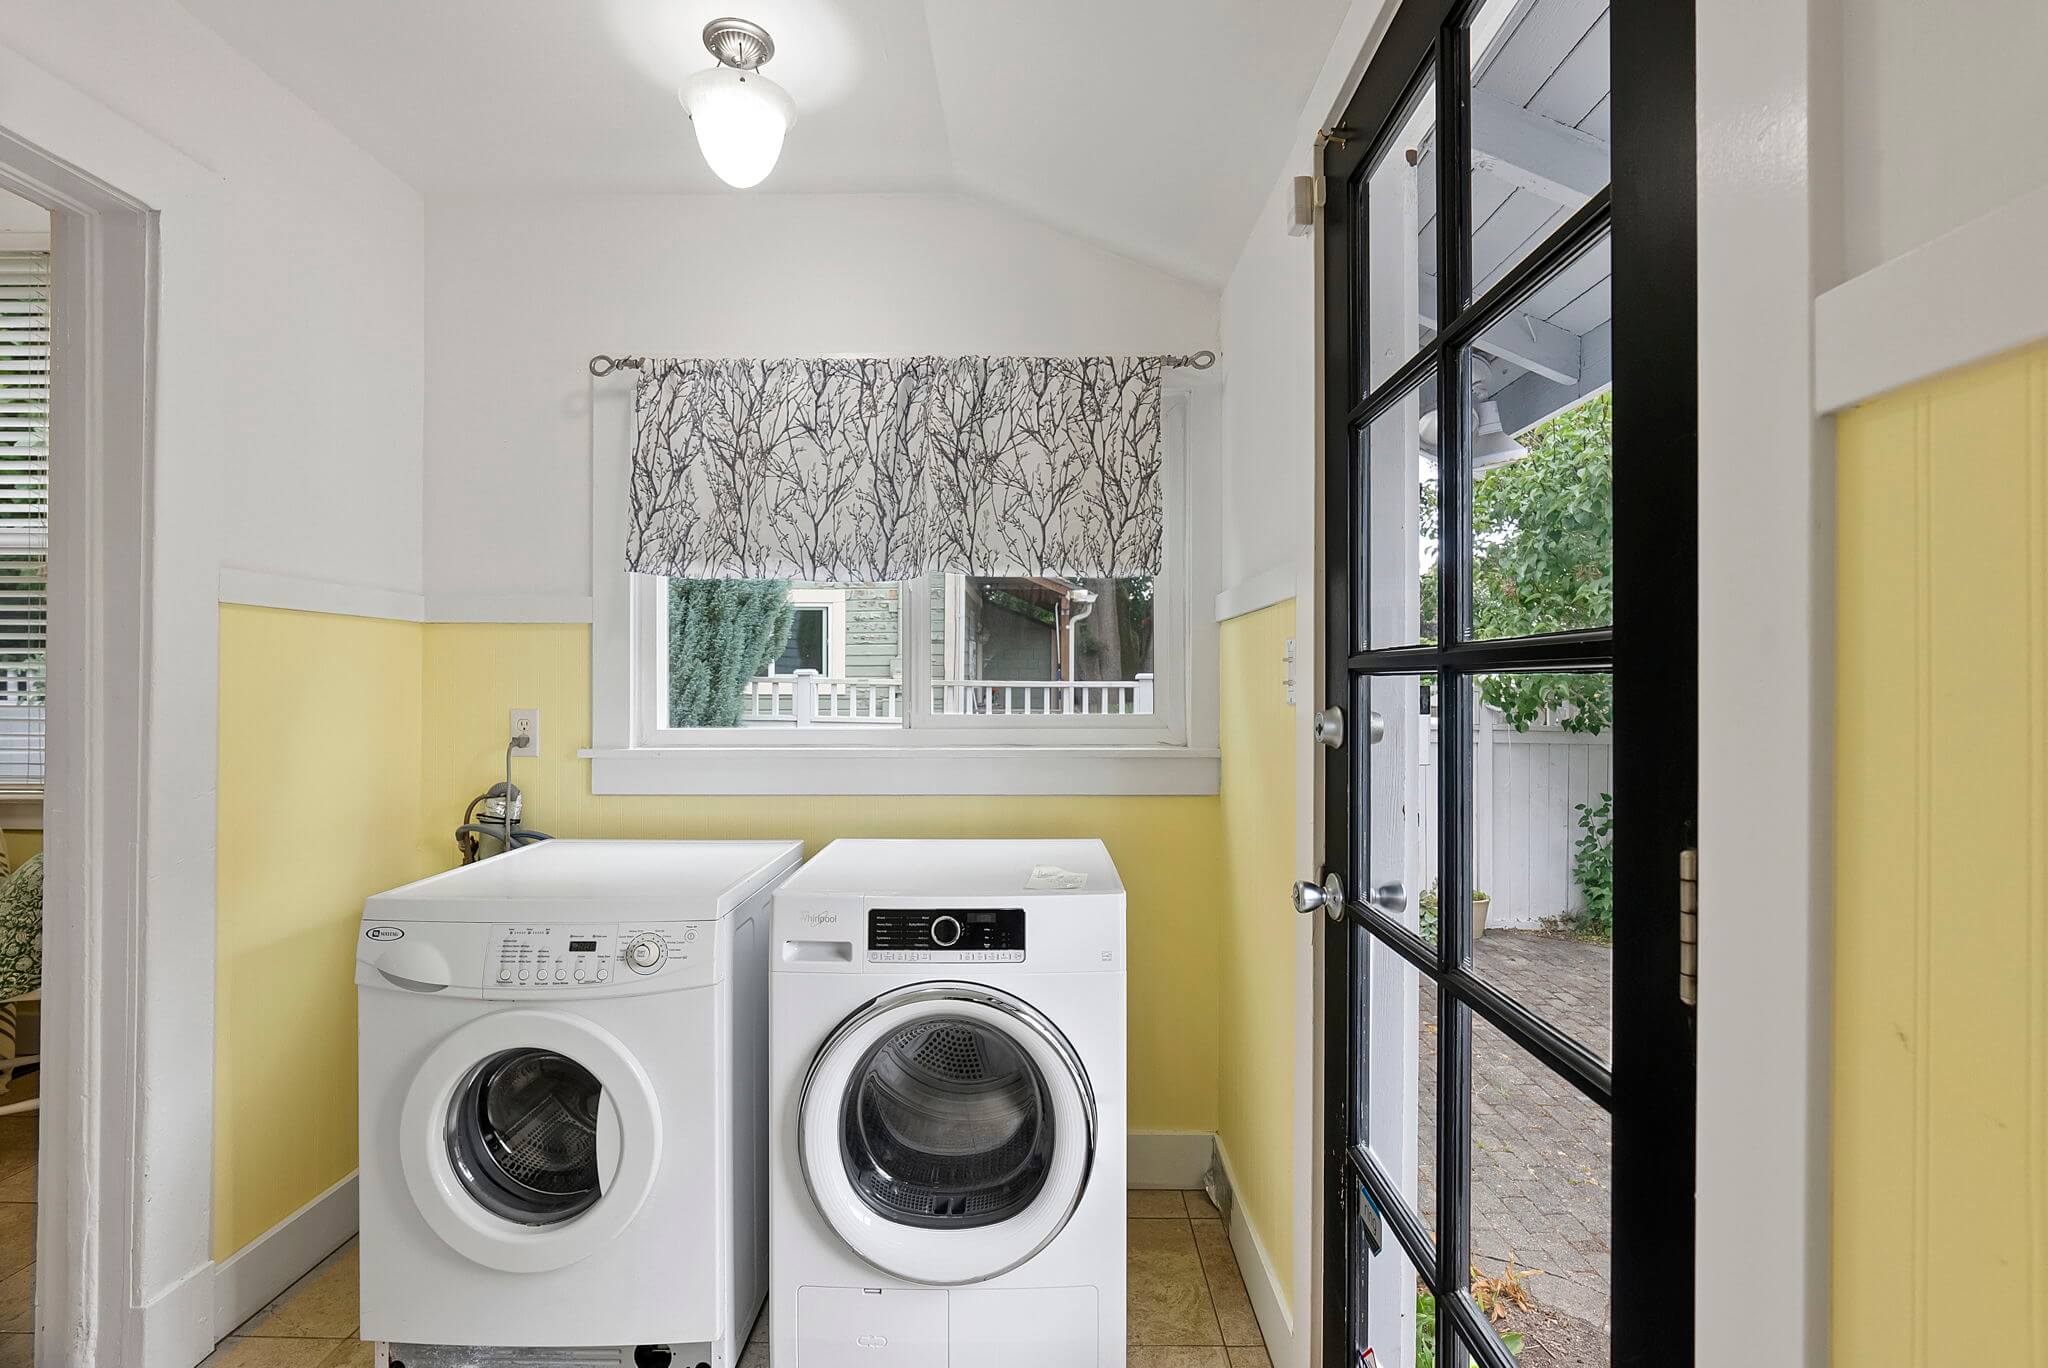 Laundry room and back yard access